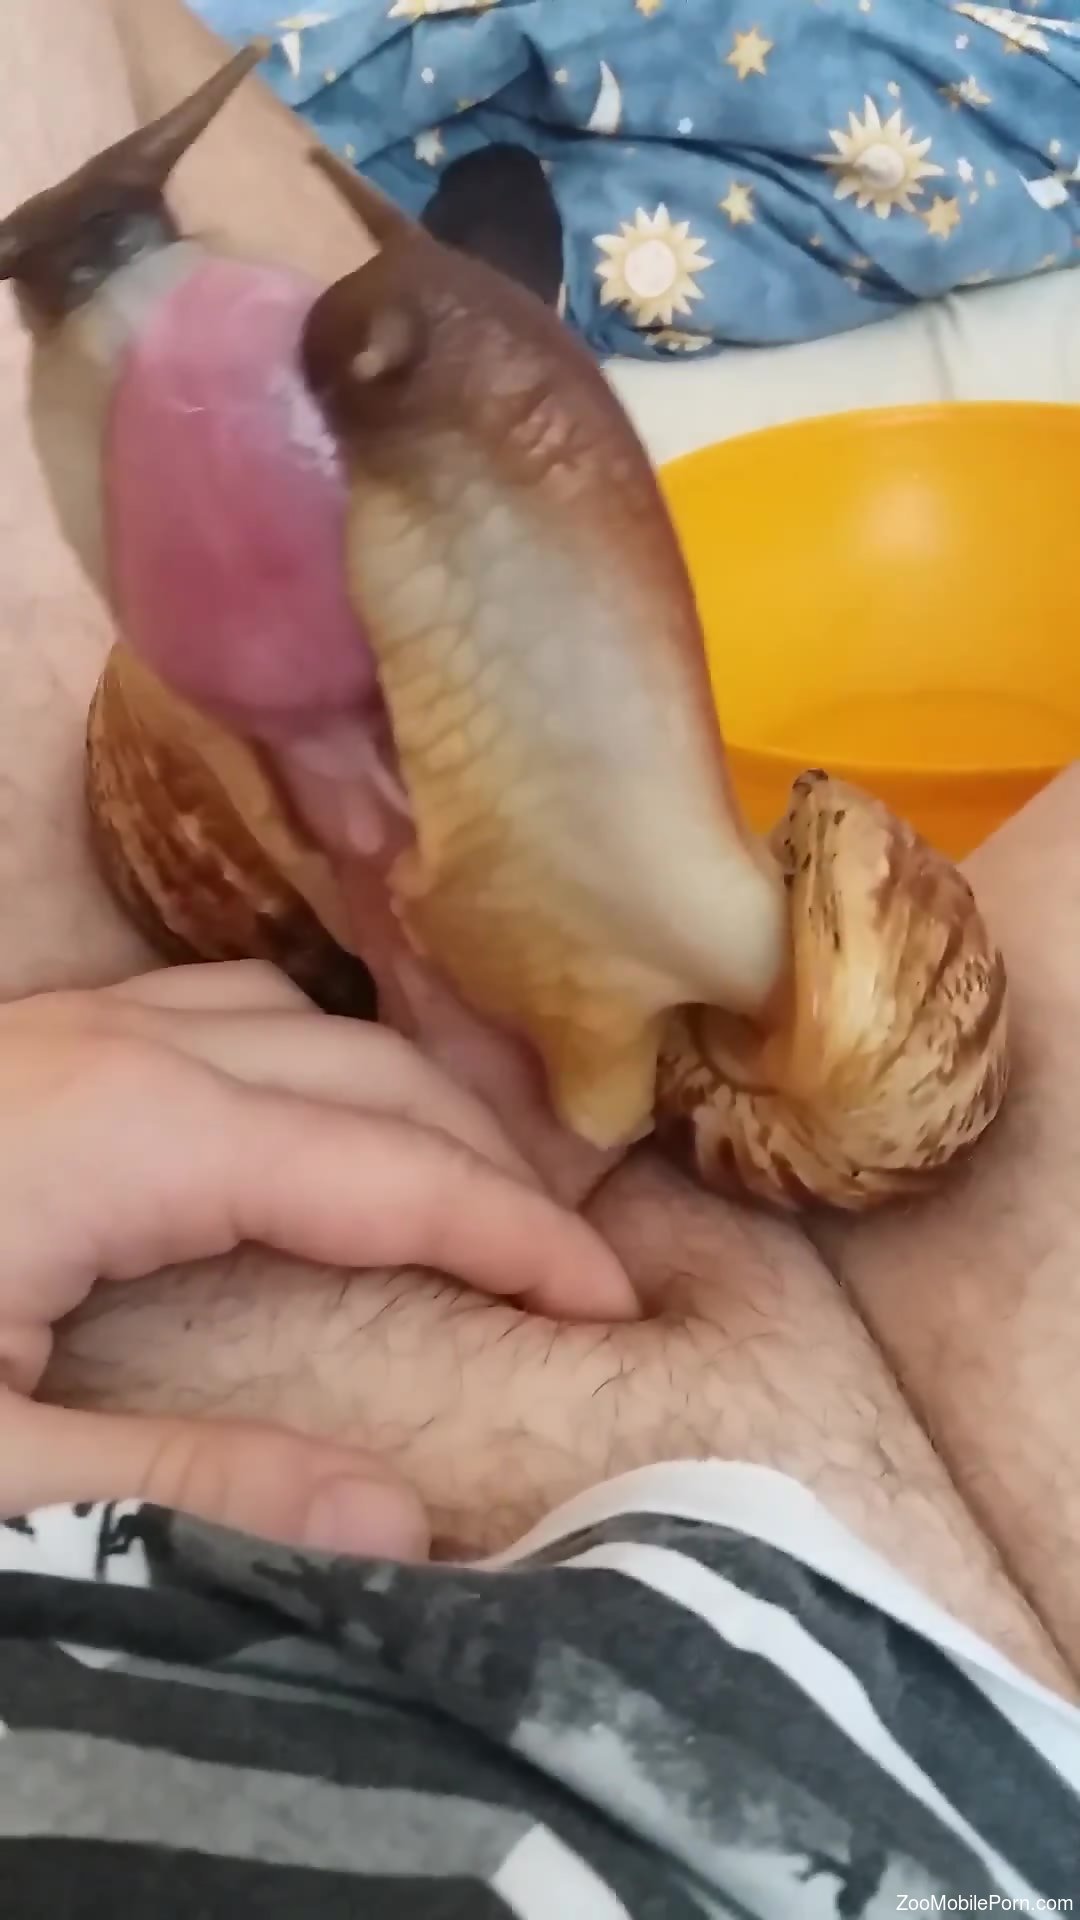 1080px x 1920px - Man applies snails on his dick during masturbation